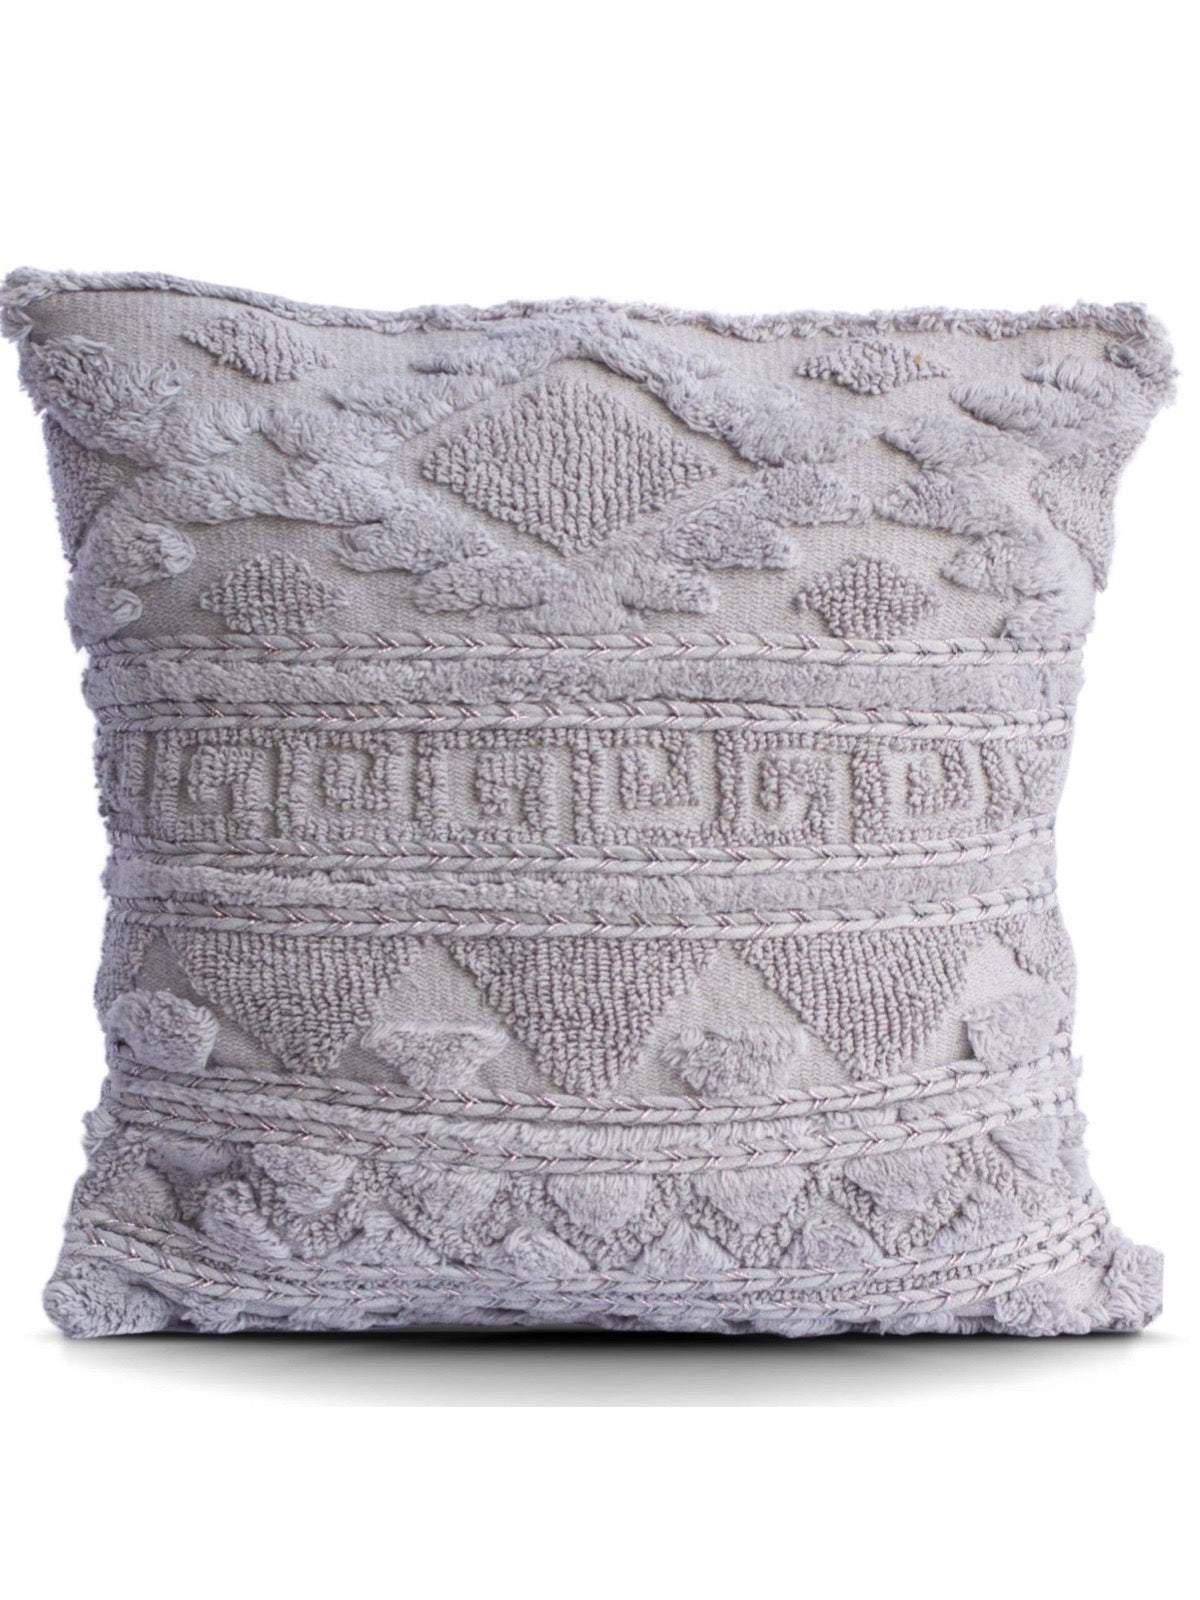 This 18x18 Greek Key gray tufted decorative pillow is inspired by the classic design element of the greek key symbolizing infinity and the eternal flow of life. Sold by KYA Home Decor